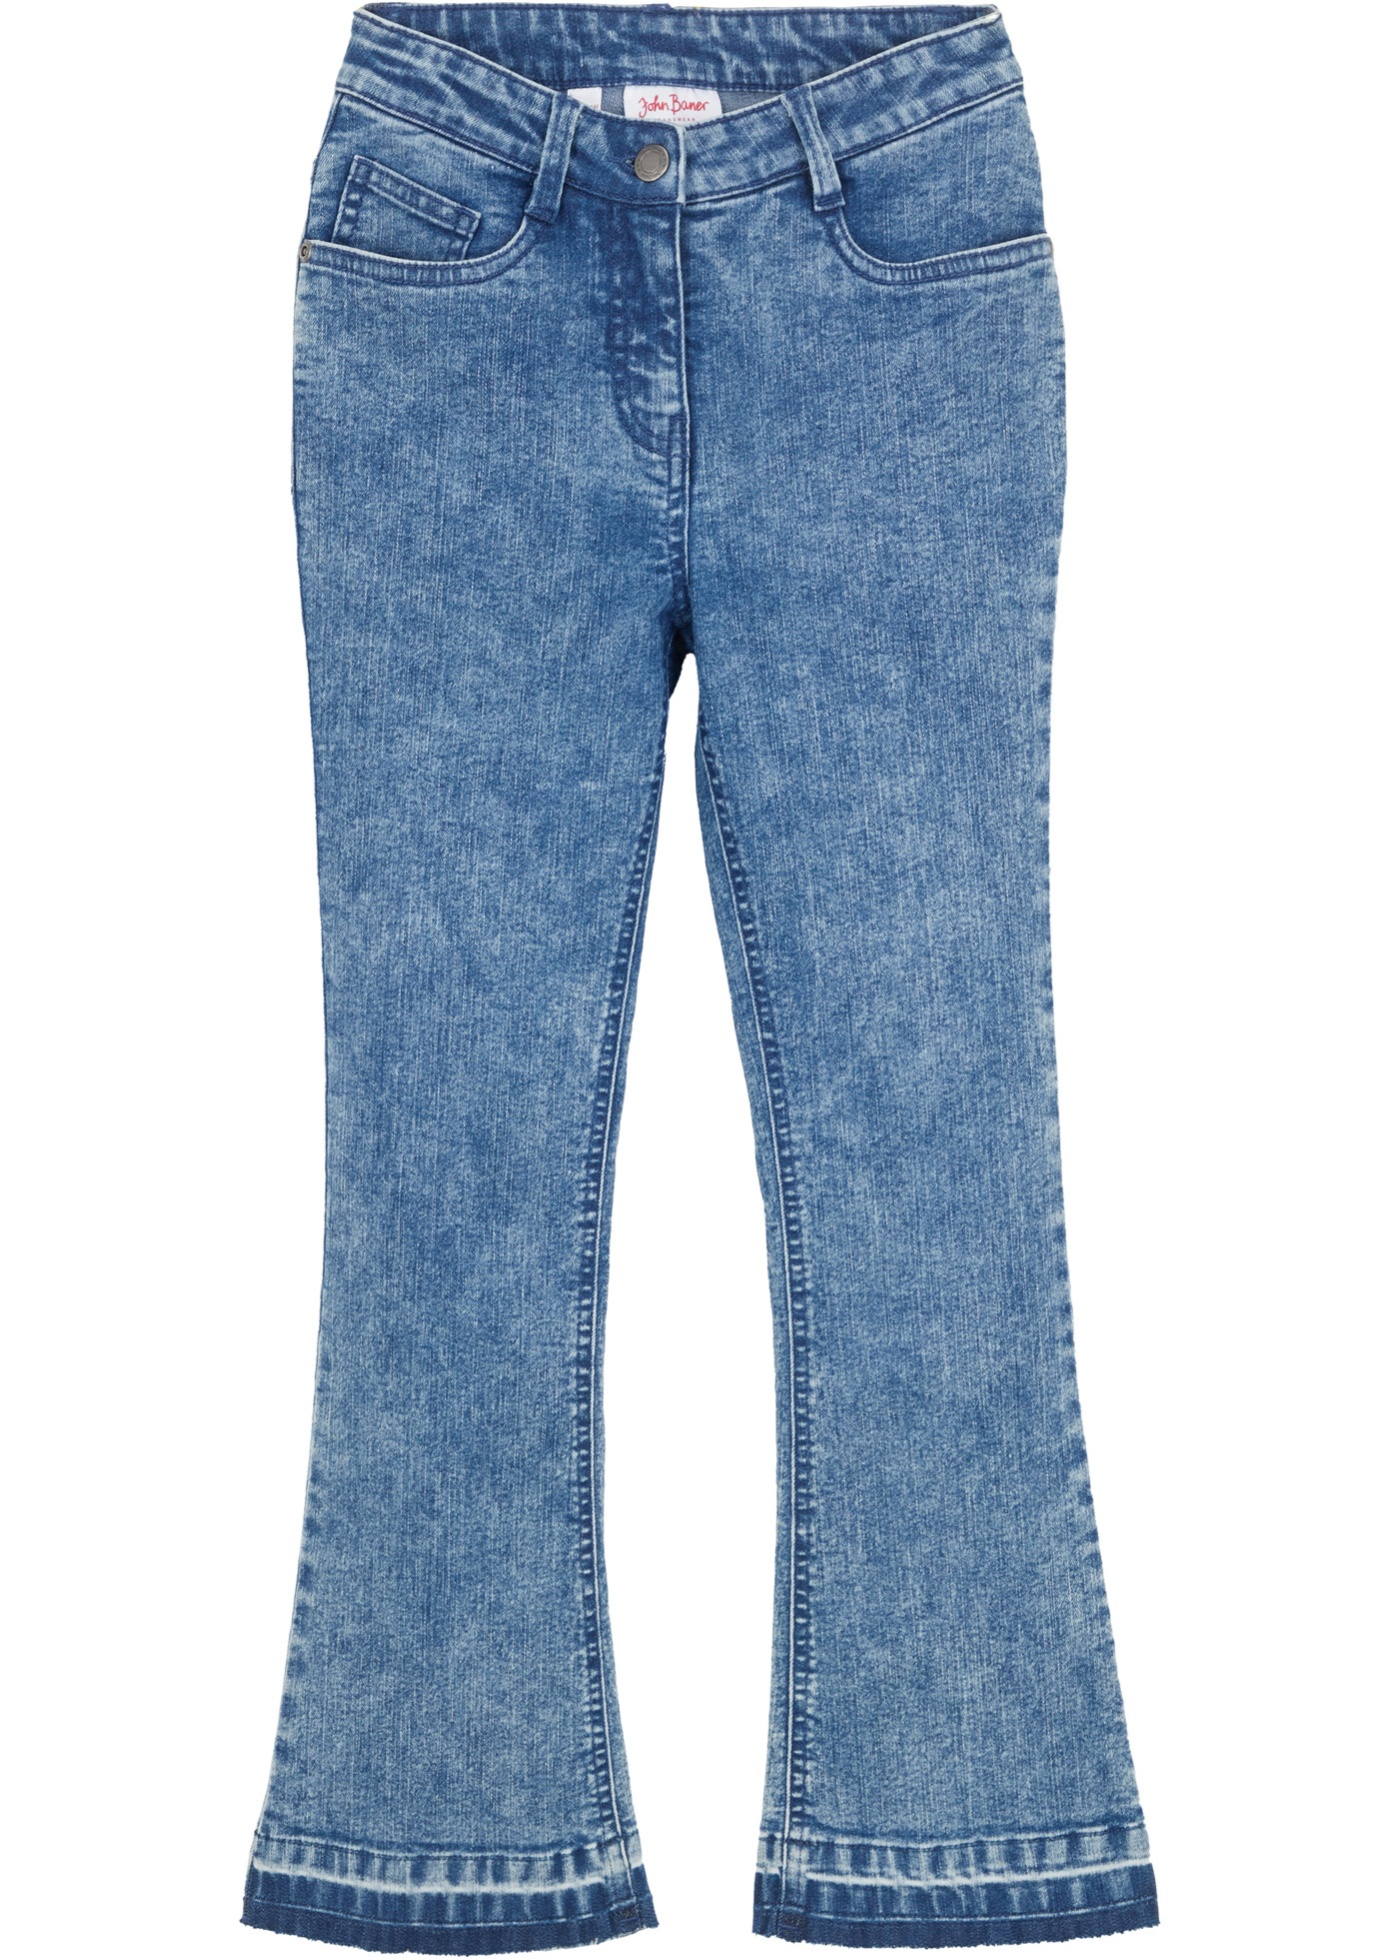 Jean extensible fille, flared